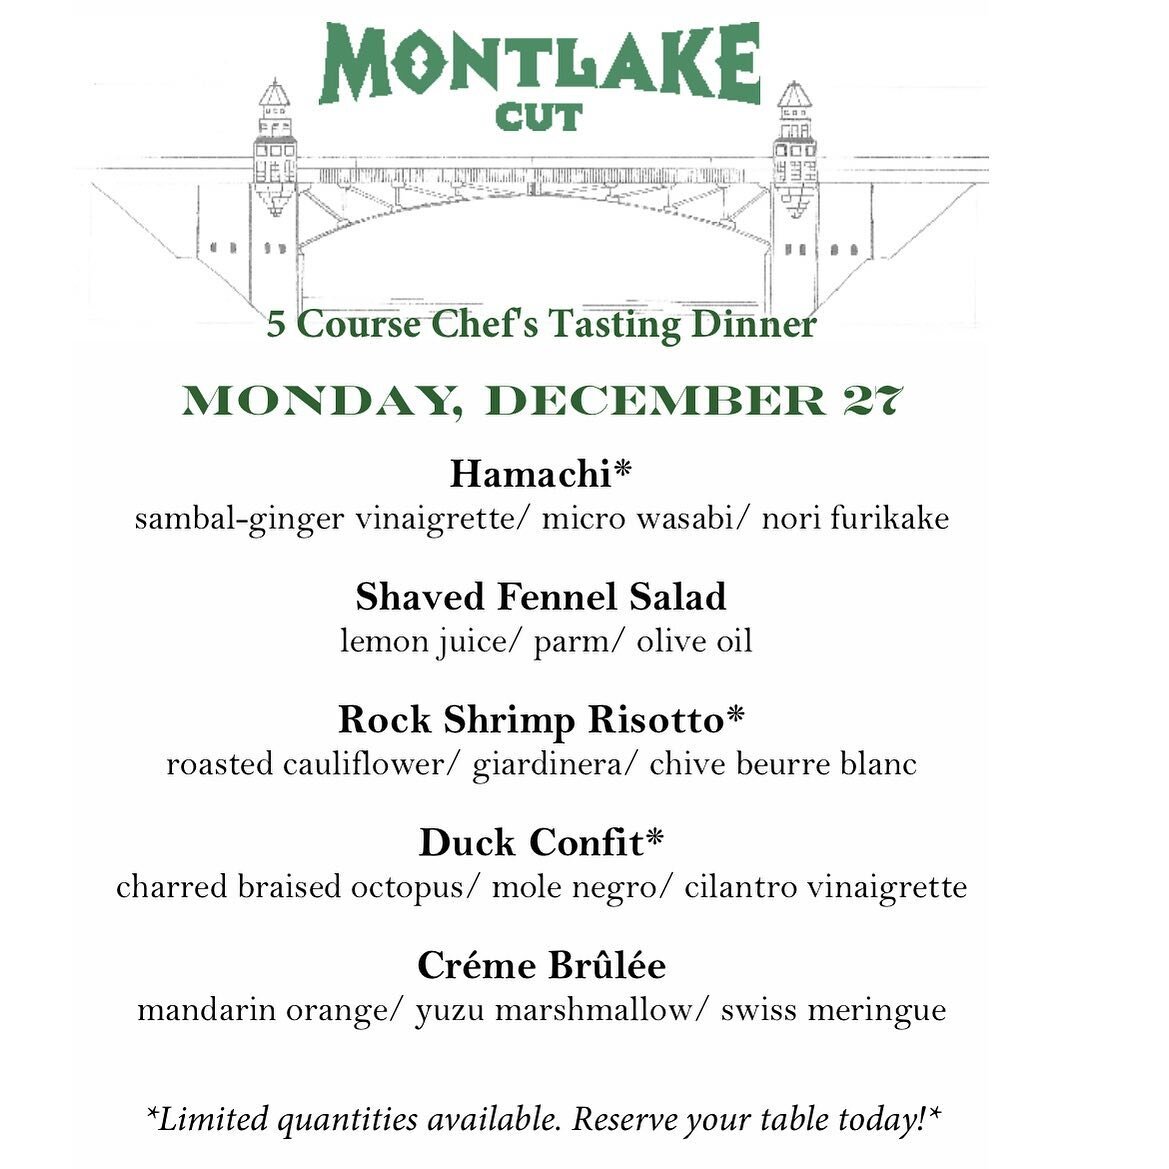 Monday December 27, Special 5 Course Chef&rsquo;s tasting dinner. (Limited quantities available) Call 214-739-8220 to reserve your table today!